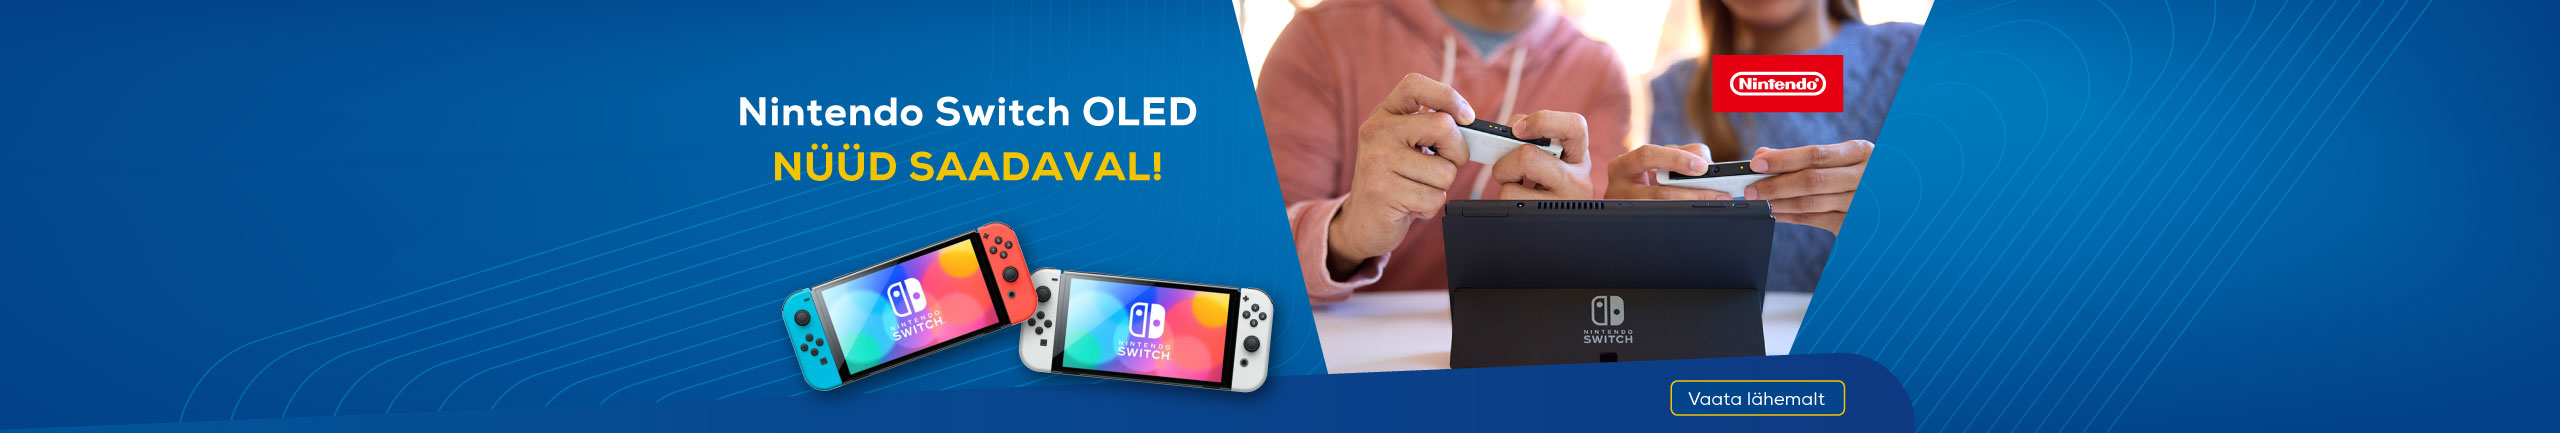 Nintendo Switch OLED now available!